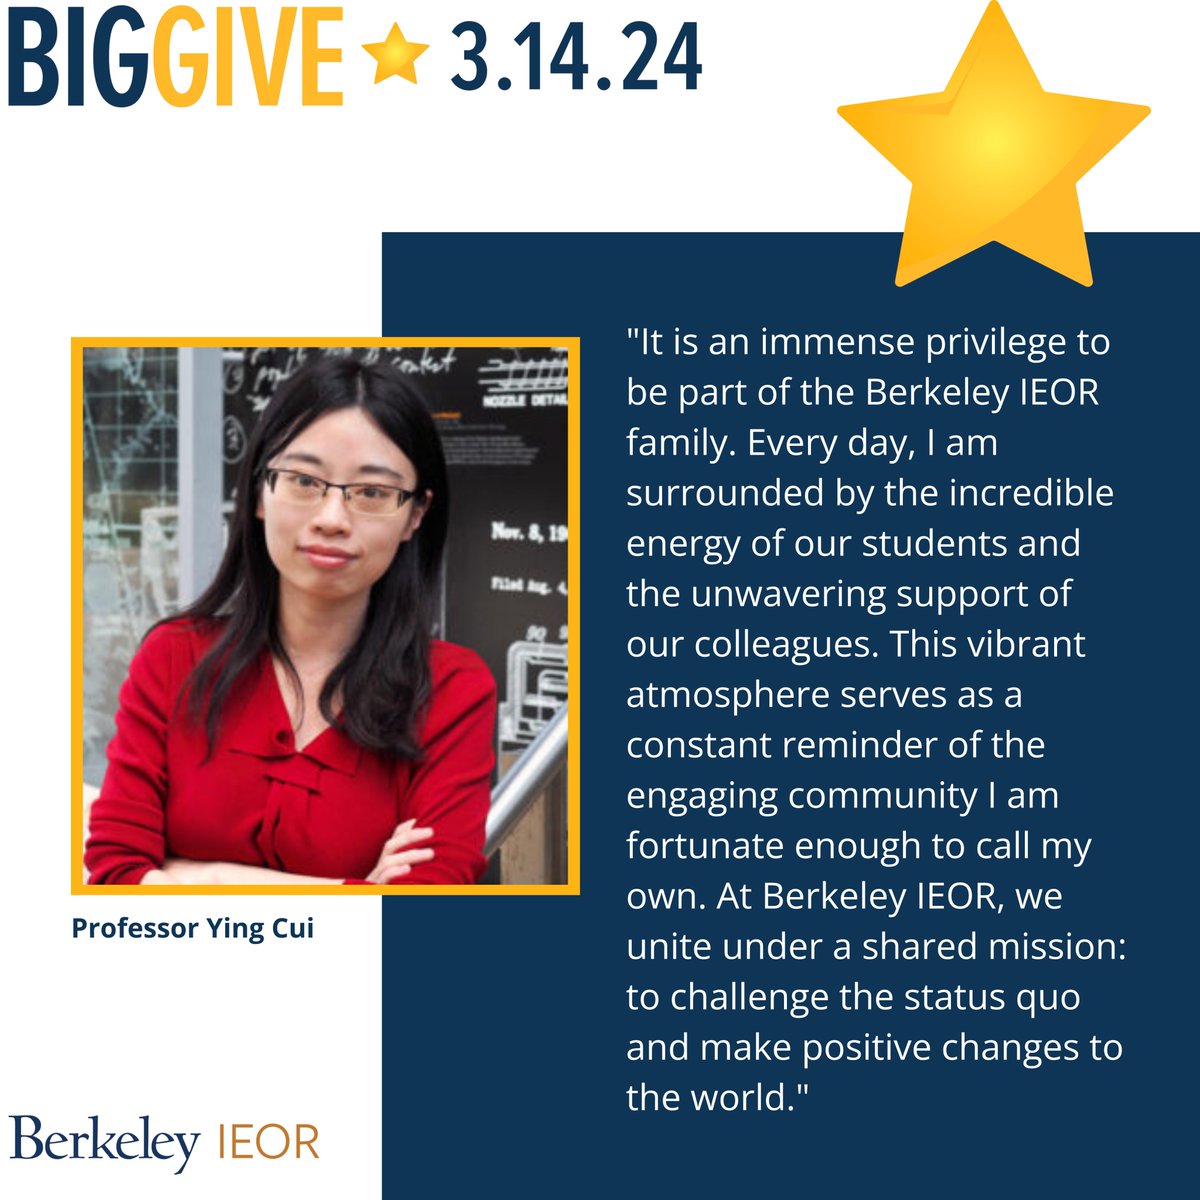 When you support Berkeley IEOR, you invest in the very core of Berkeley's excellence and secure our intellectual future for decades to come. Donate: bit.ly/3IW5I21 #BerkeleyIEOR #FundFutureEngineers #CalBigGive